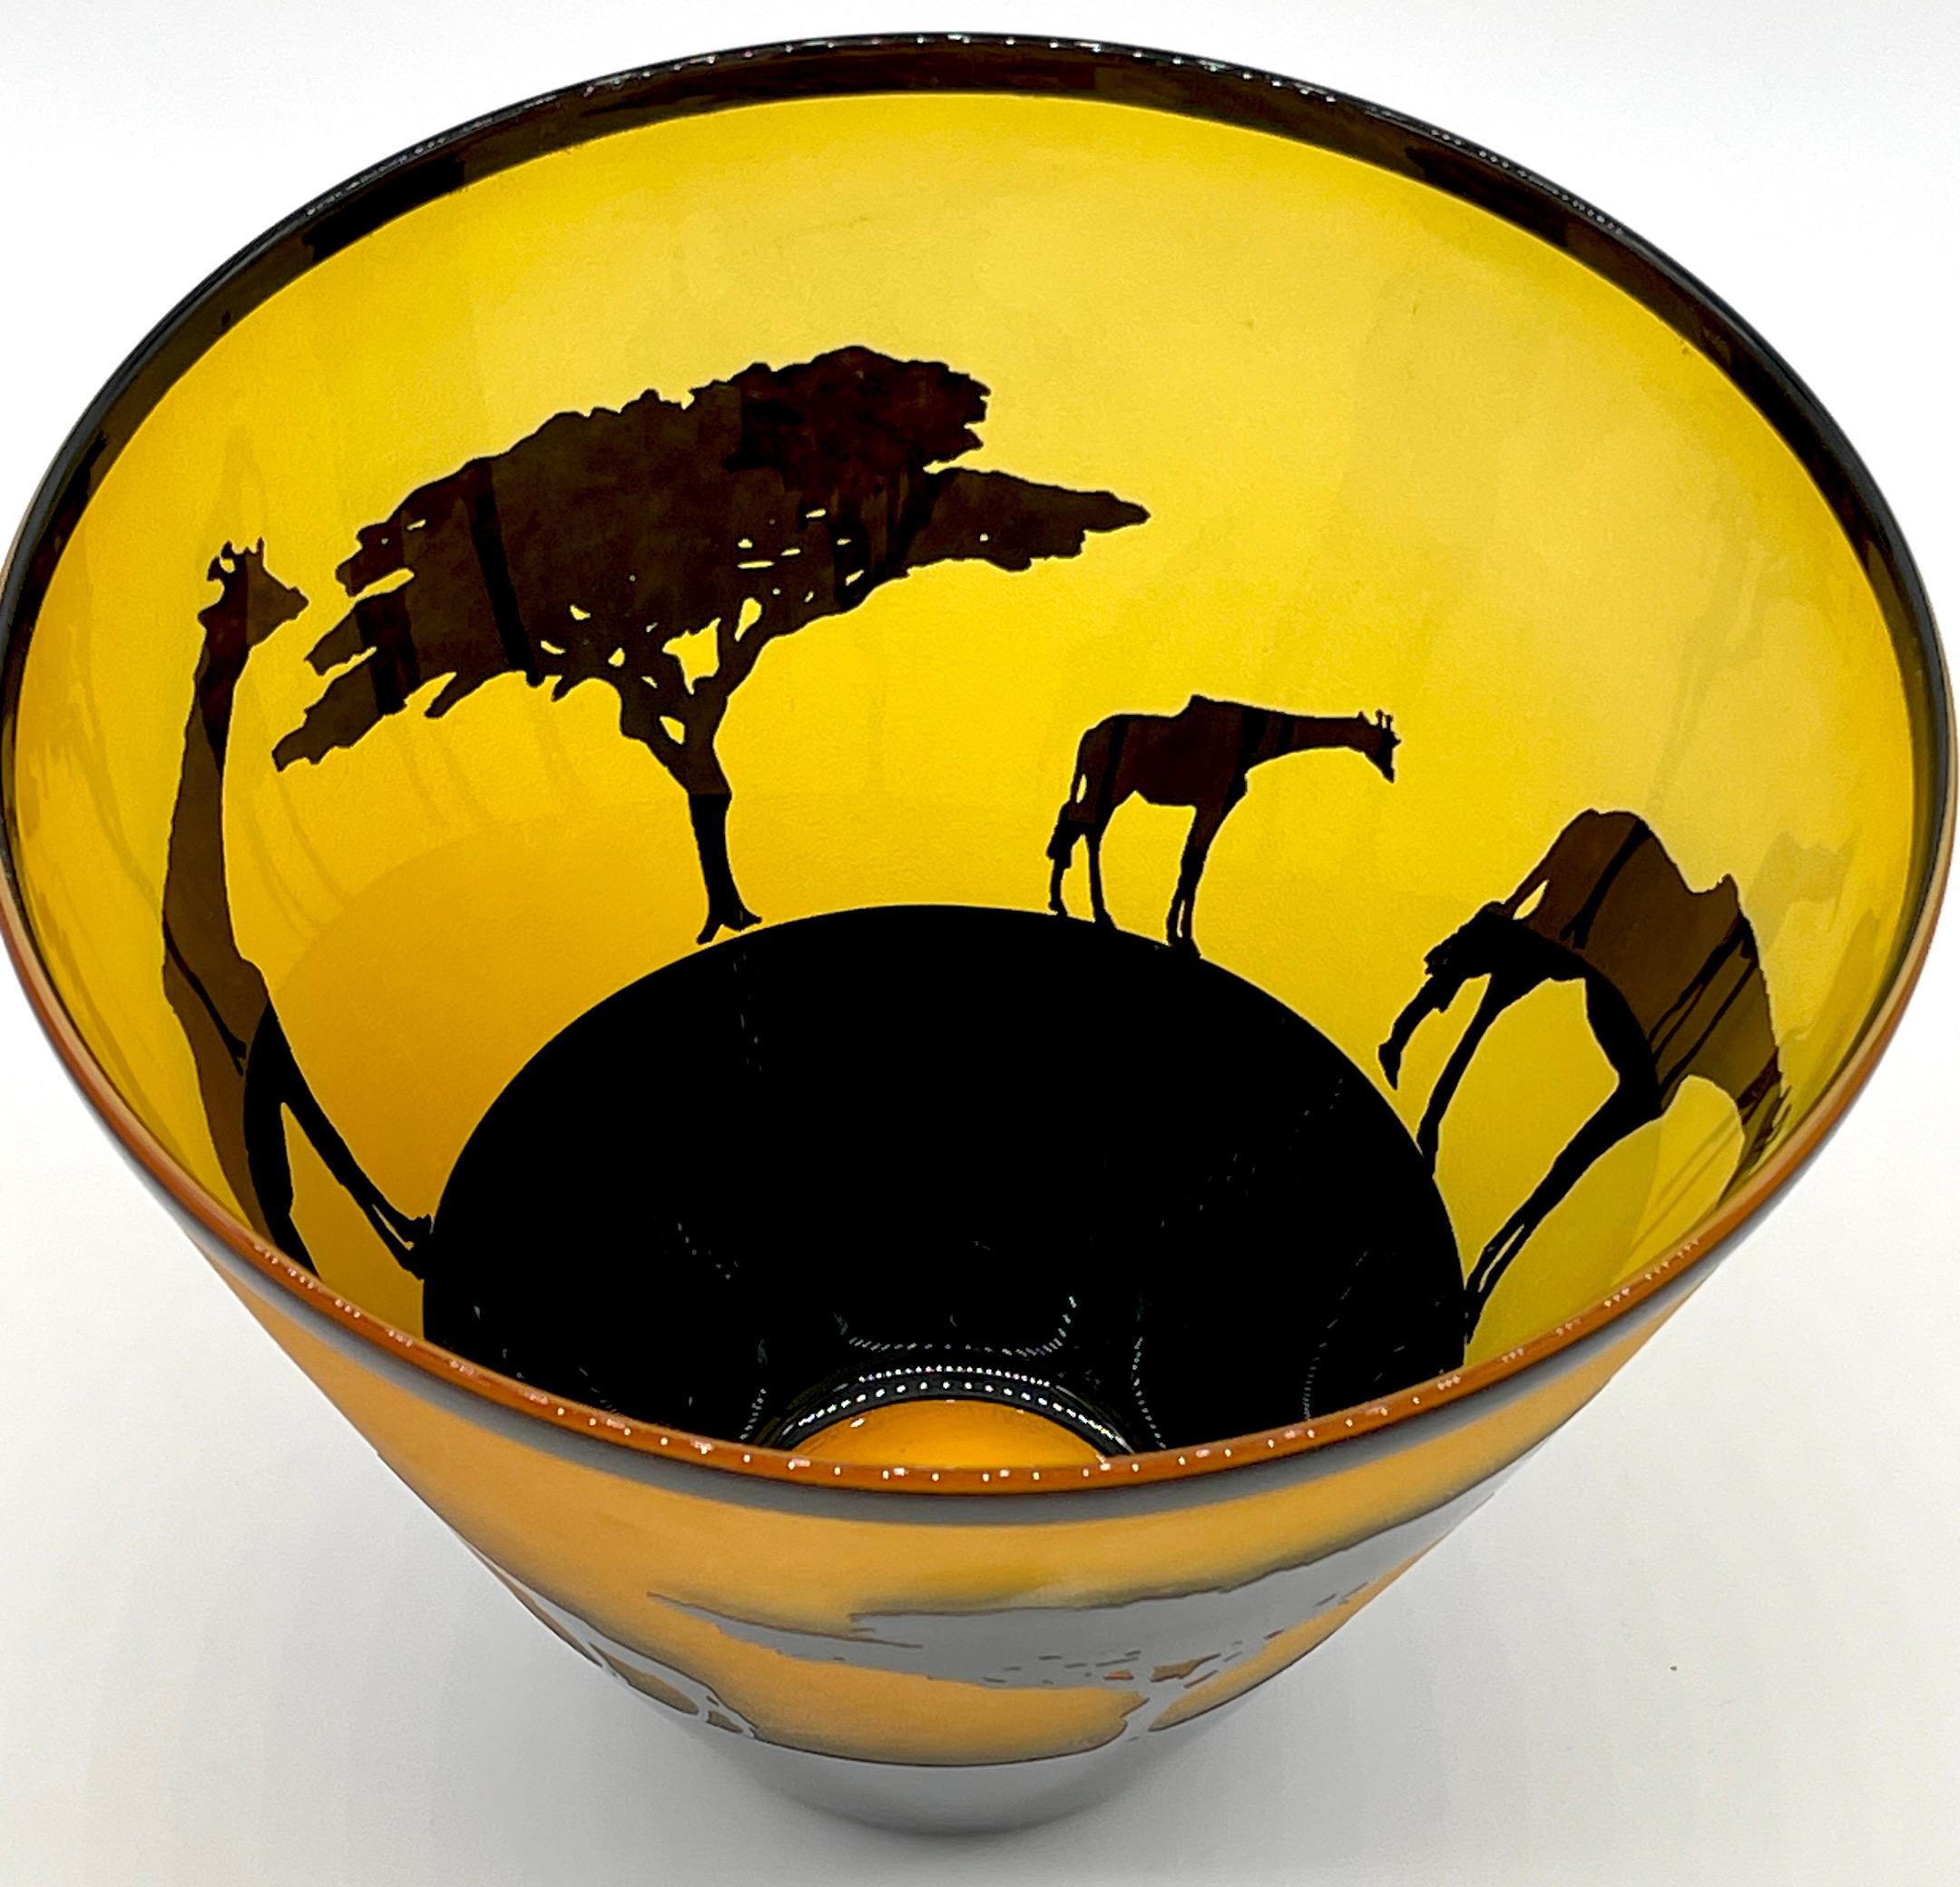 African Landscape Cameo Glass Vase by Steven Correia, 1986 Edition of #168/500 4